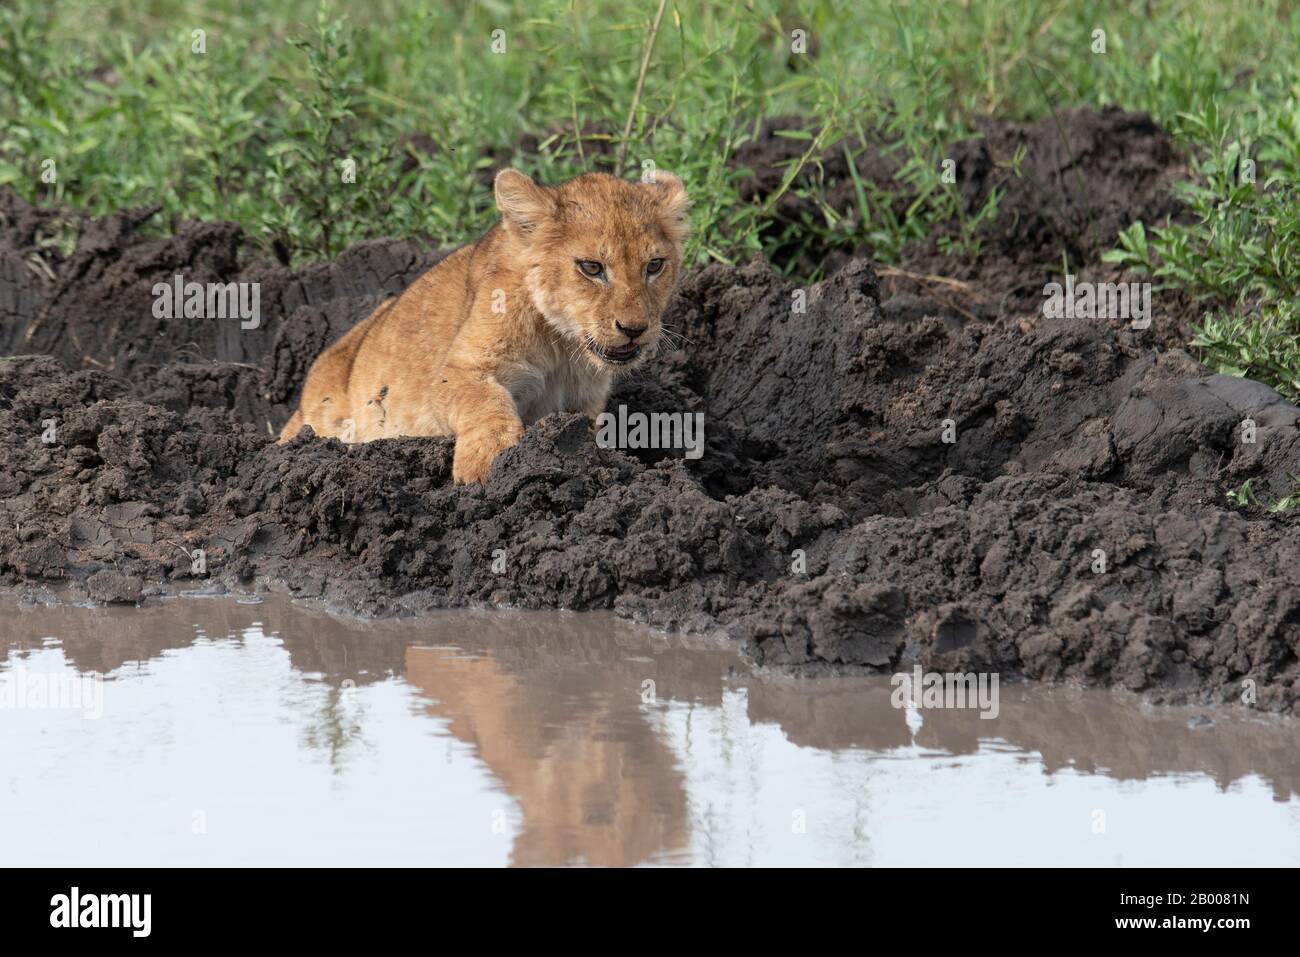 Lions cub walking in the mud Stock Photo